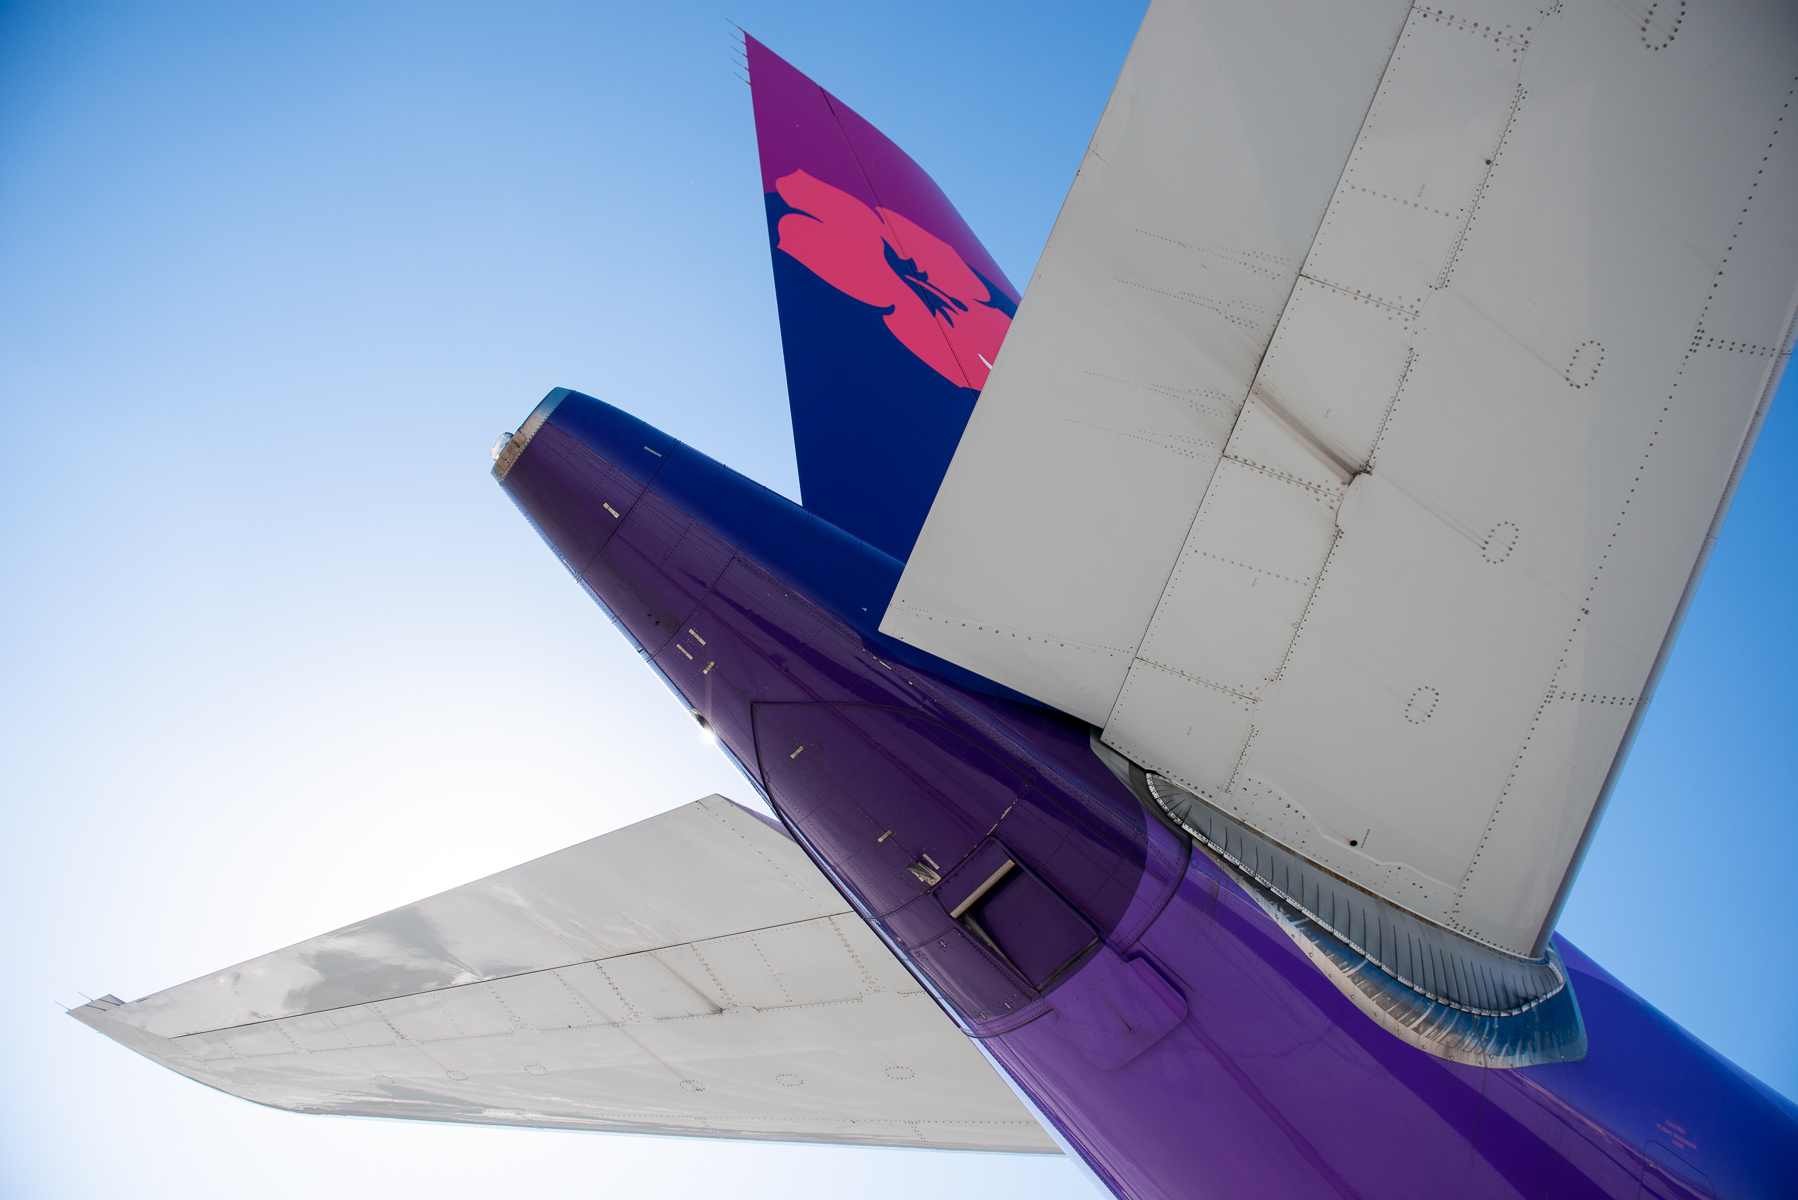 Hawaiian Airlines tail section